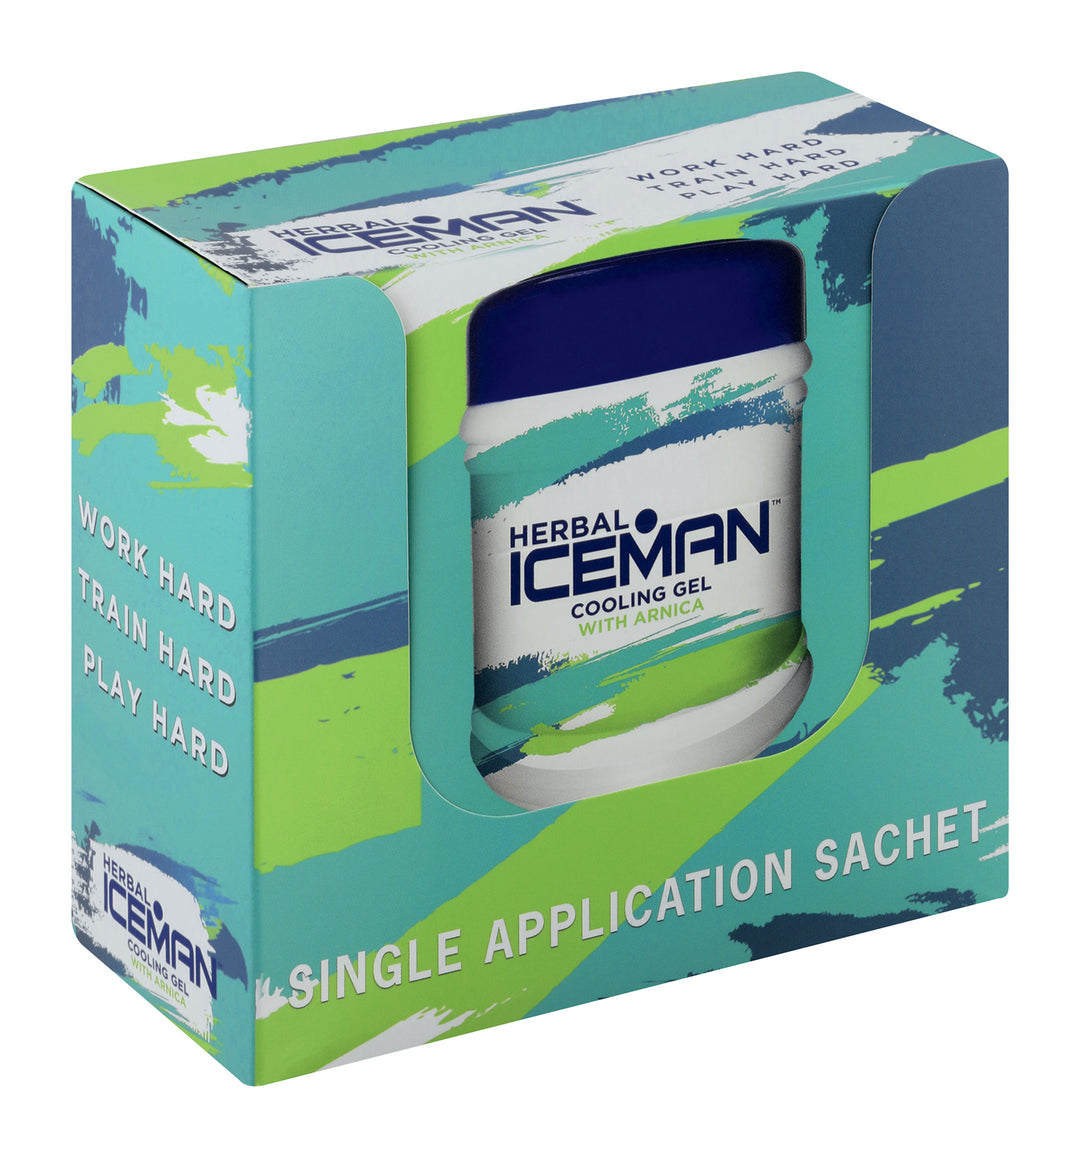 Herbal Iceman Cooling Gel with Arnica Sachets - 20's